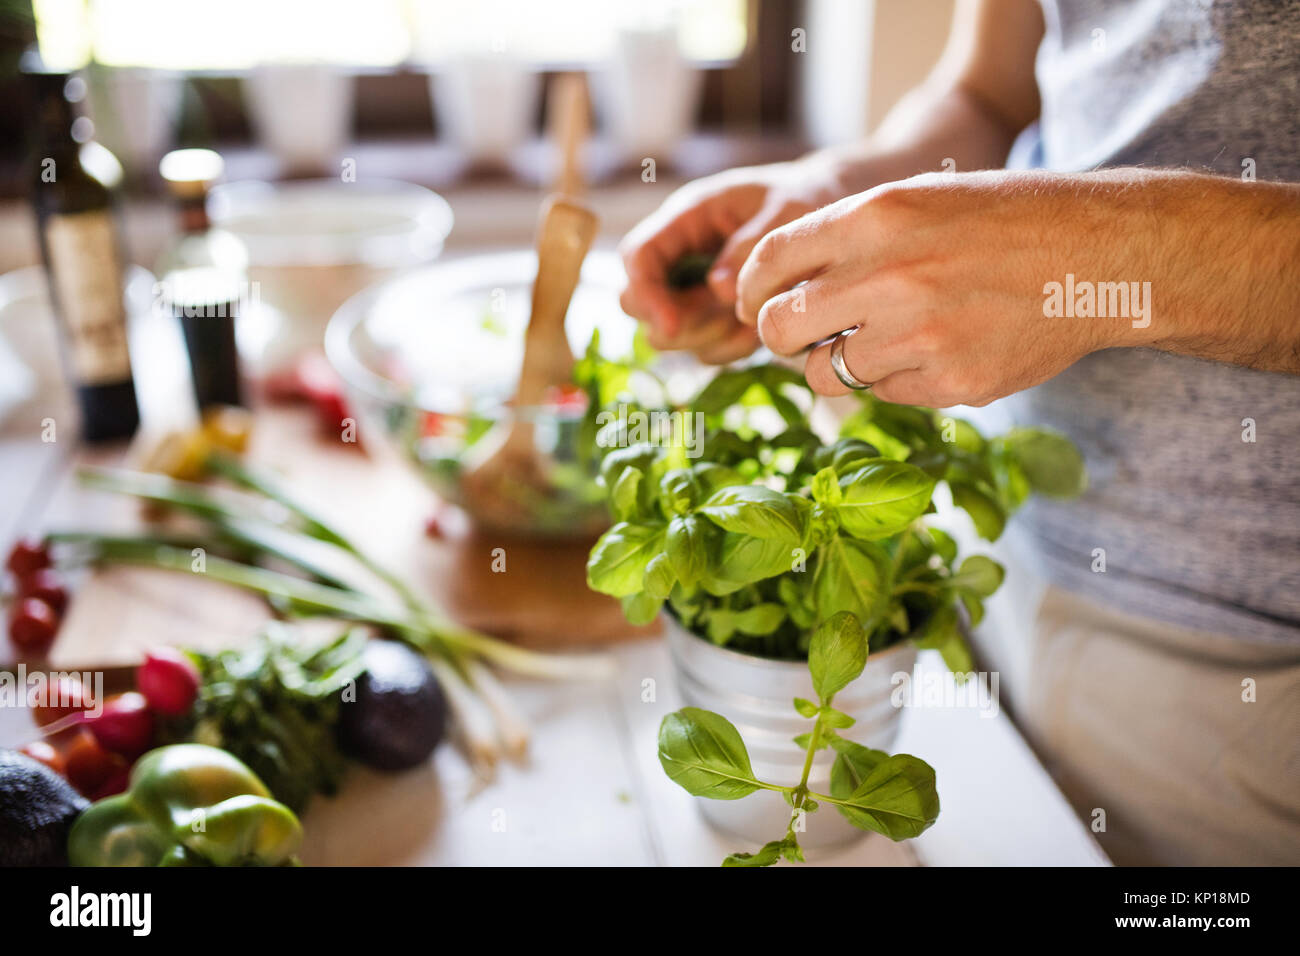 Unrecognizable young man cooking. Stock Photo